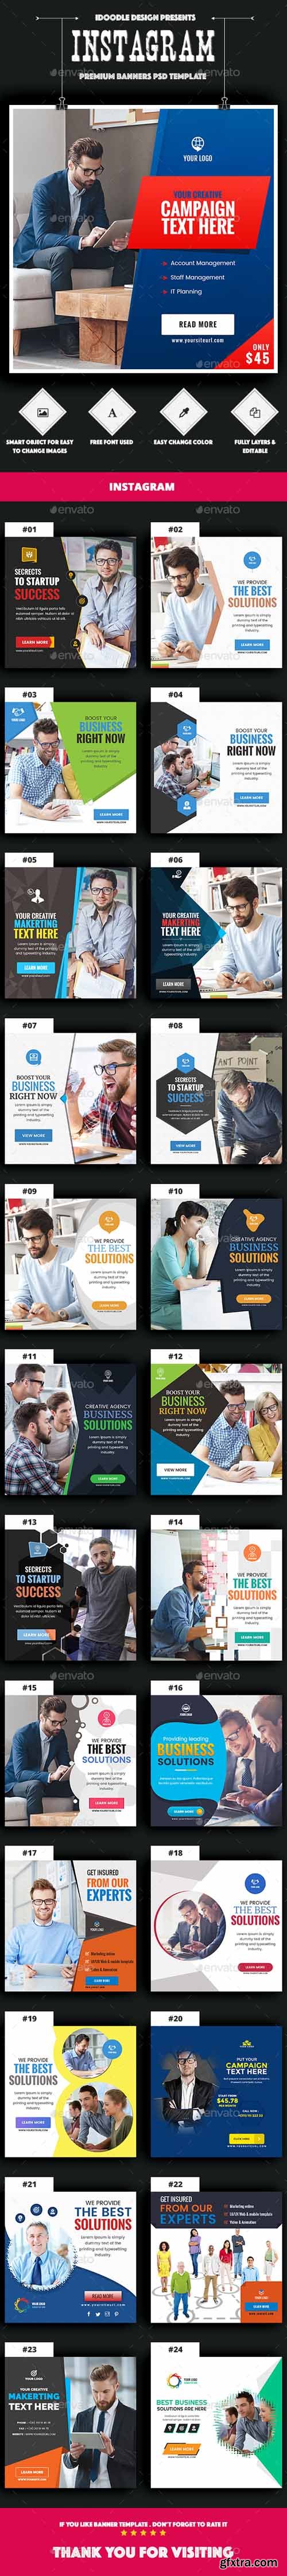 GR - Multipurpose, Business, Startup Instagram Banners Ad - 25PSD 20153043